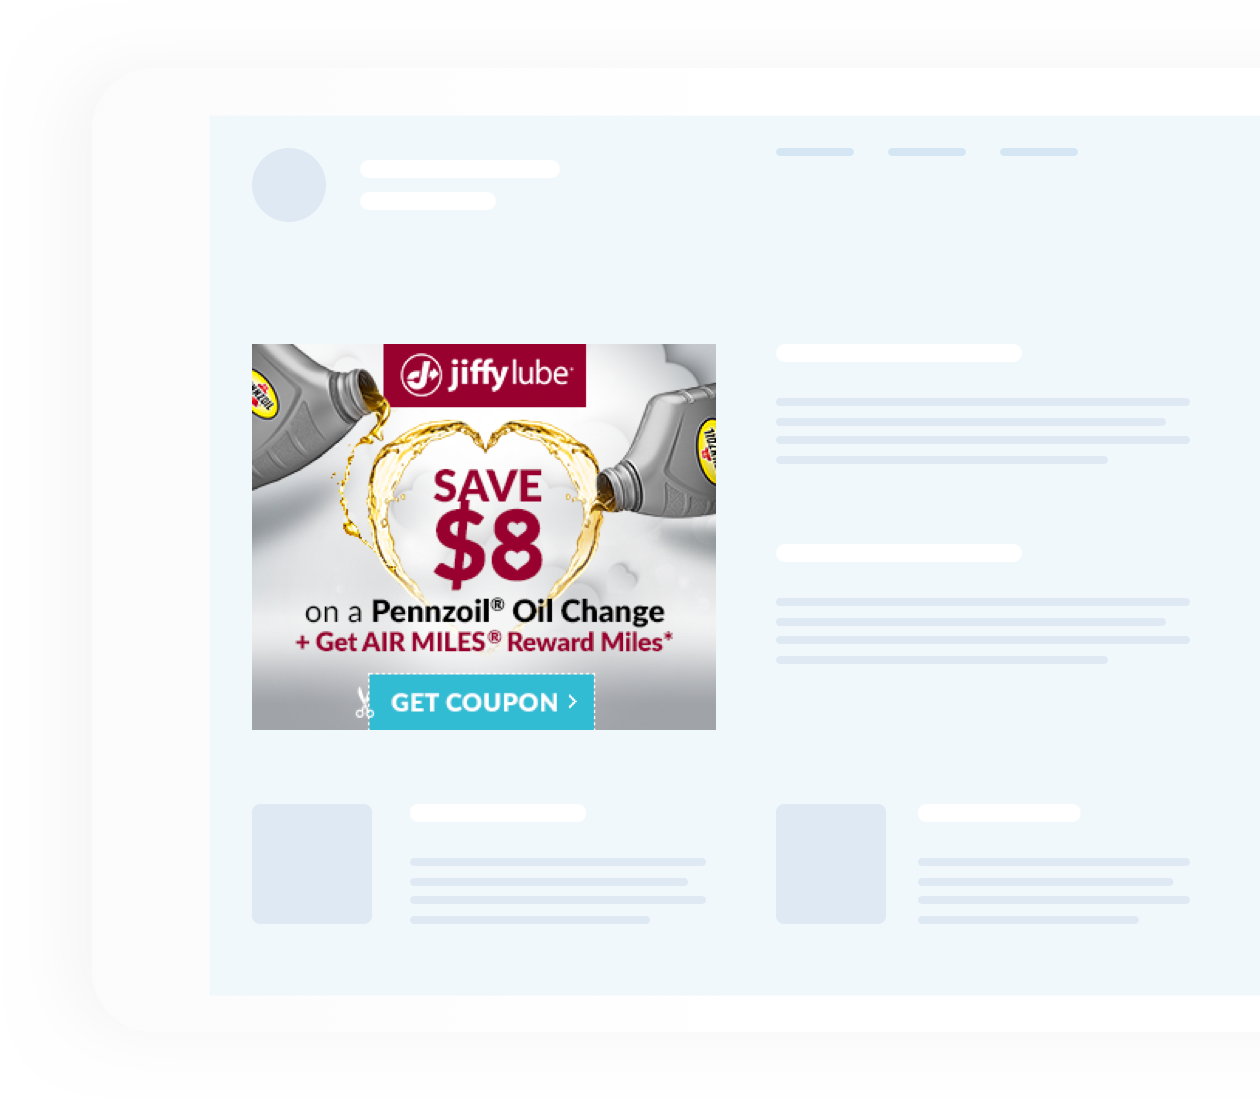 Jiffy Lube save $8 promotion on a website layout